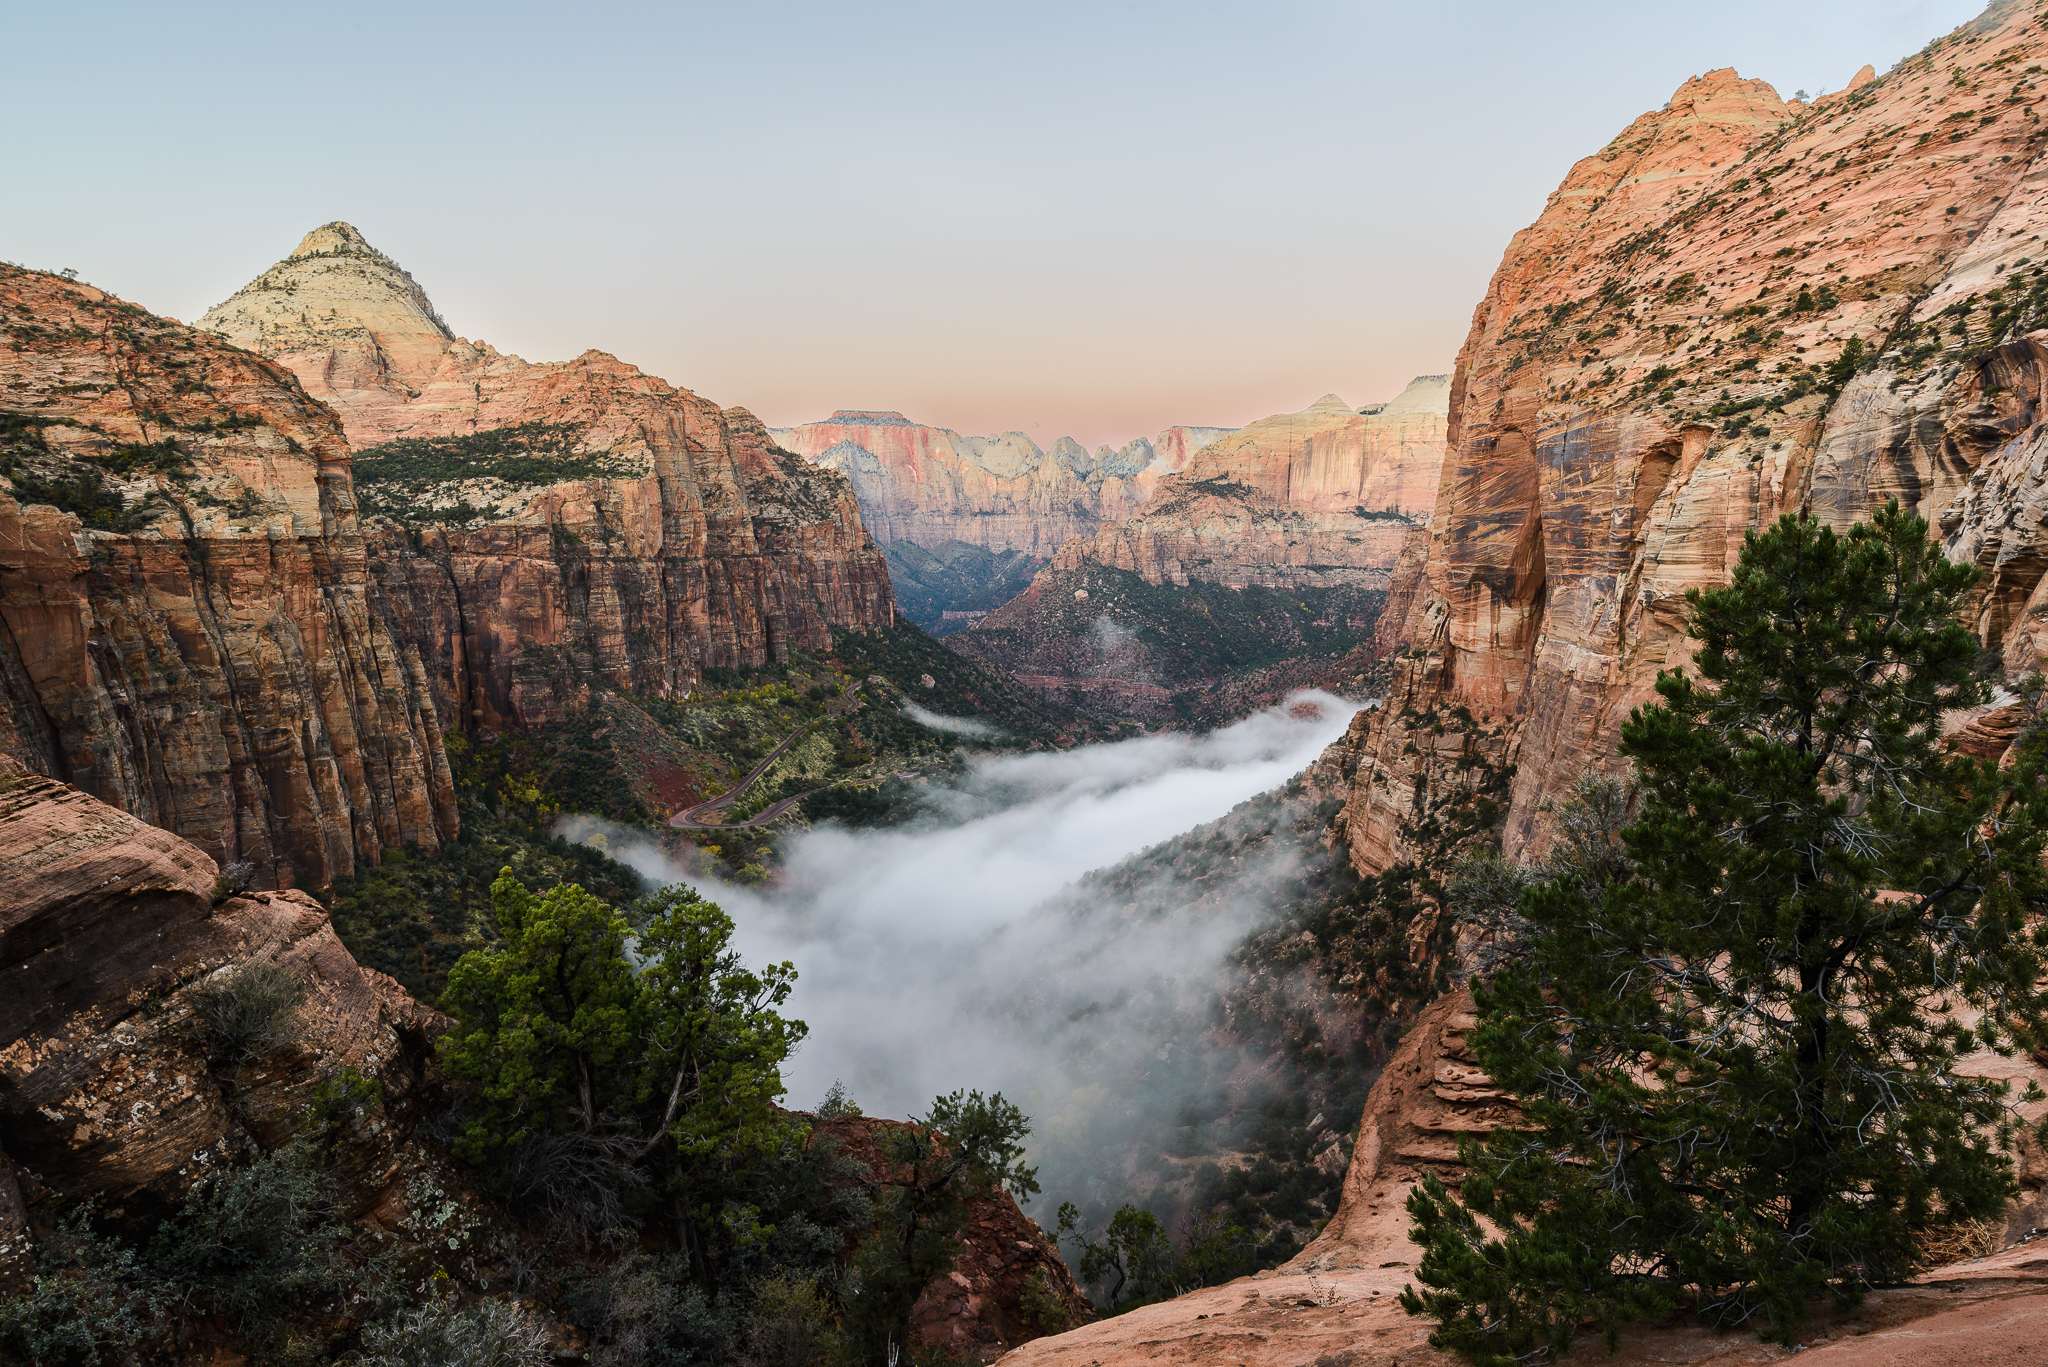 Morning Fog in the Zion Canyon